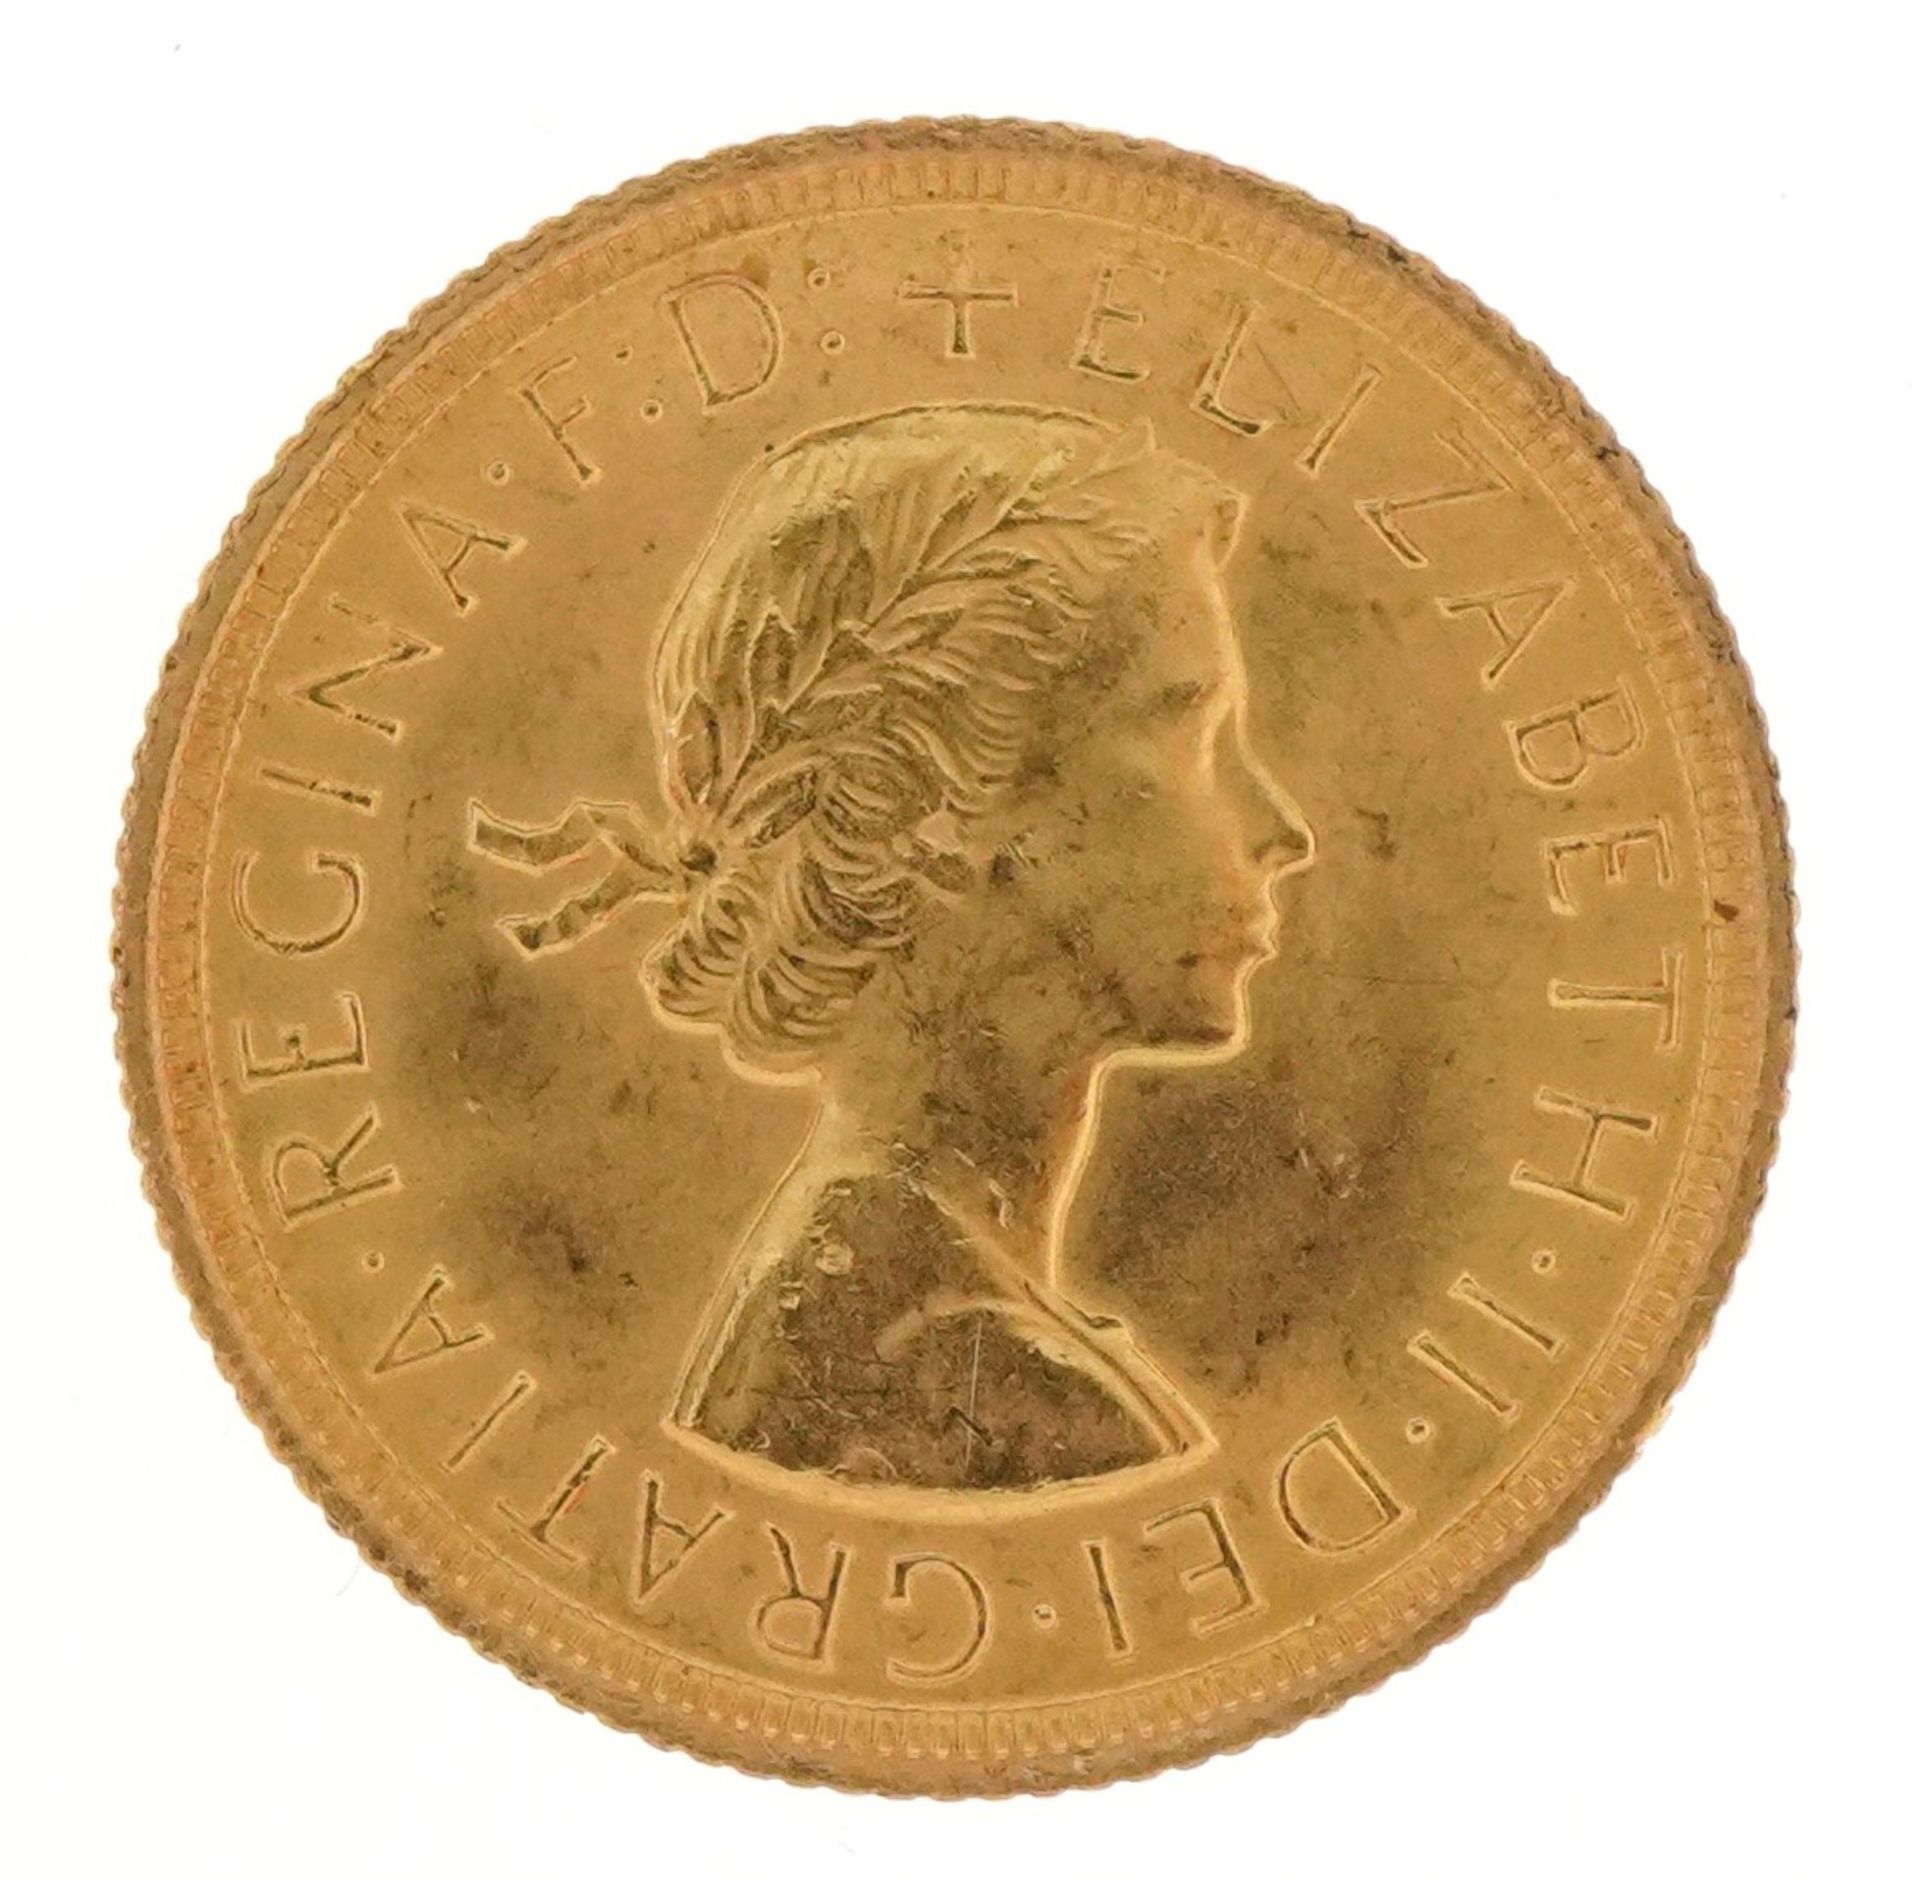 Elizabeth II 1968 gold sovereign : For further information on this lot please visit www. - Image 2 of 3